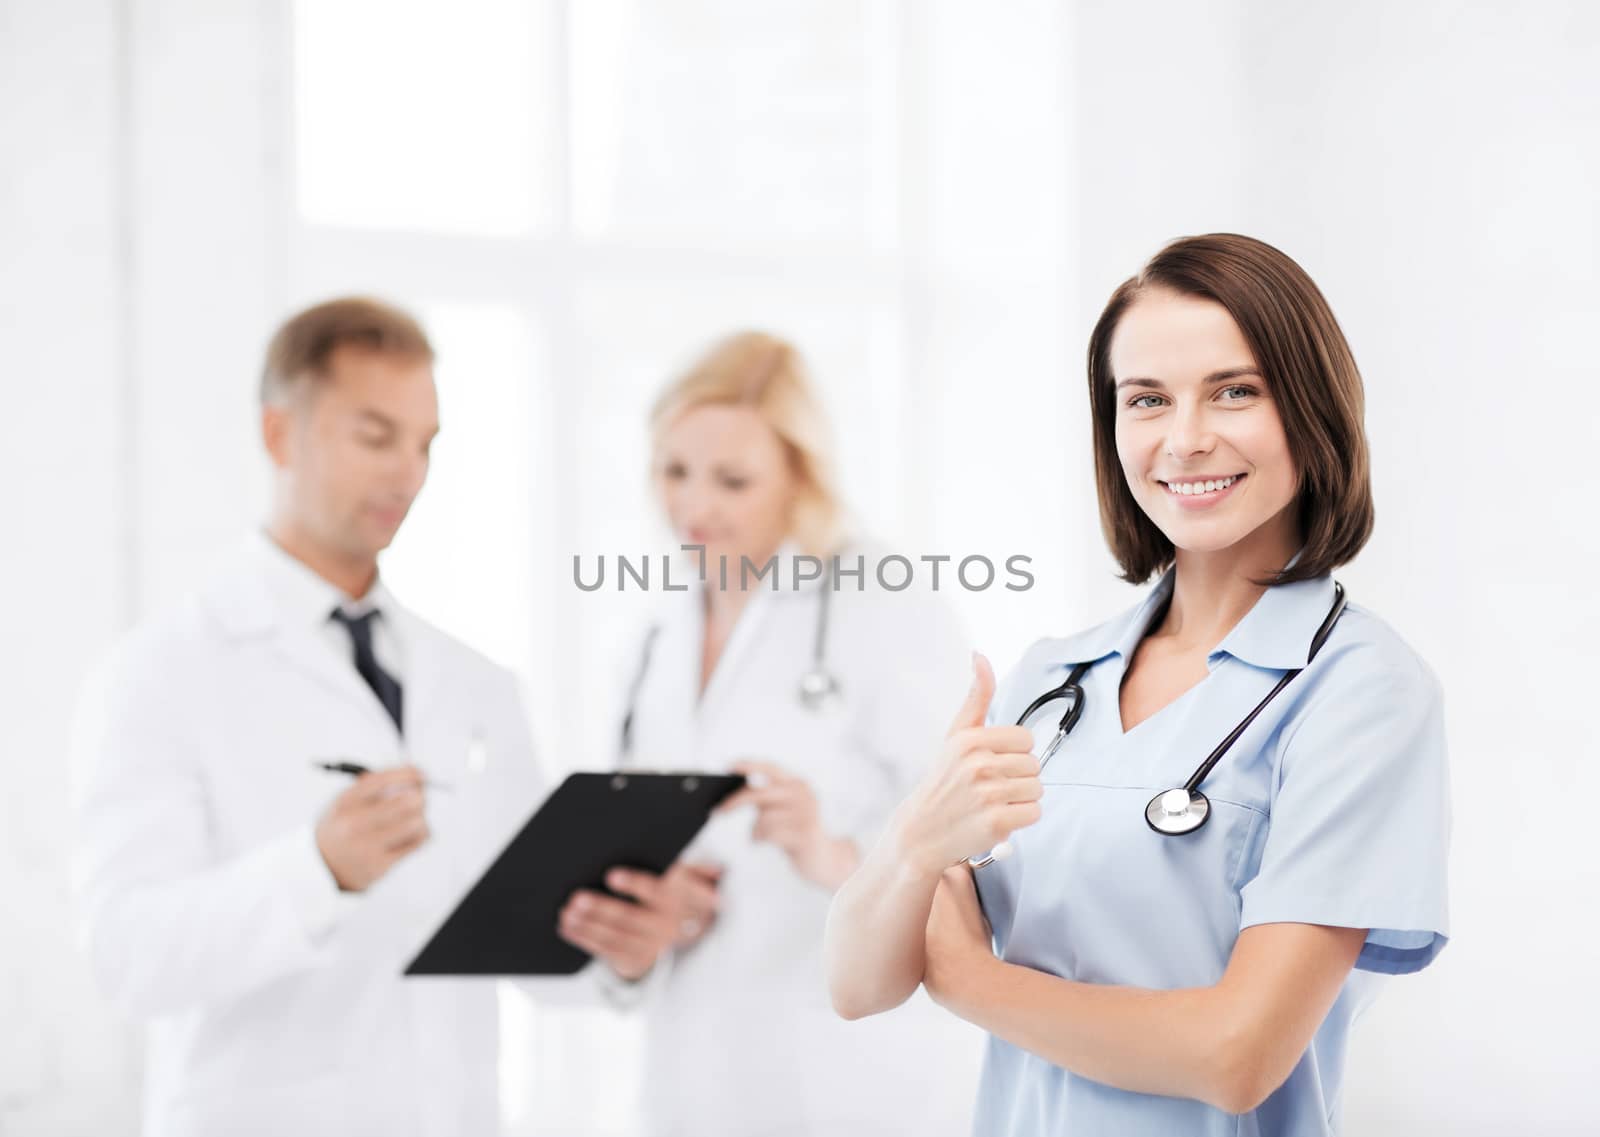 healthcare and medical concept - young female doctor with stethoscope